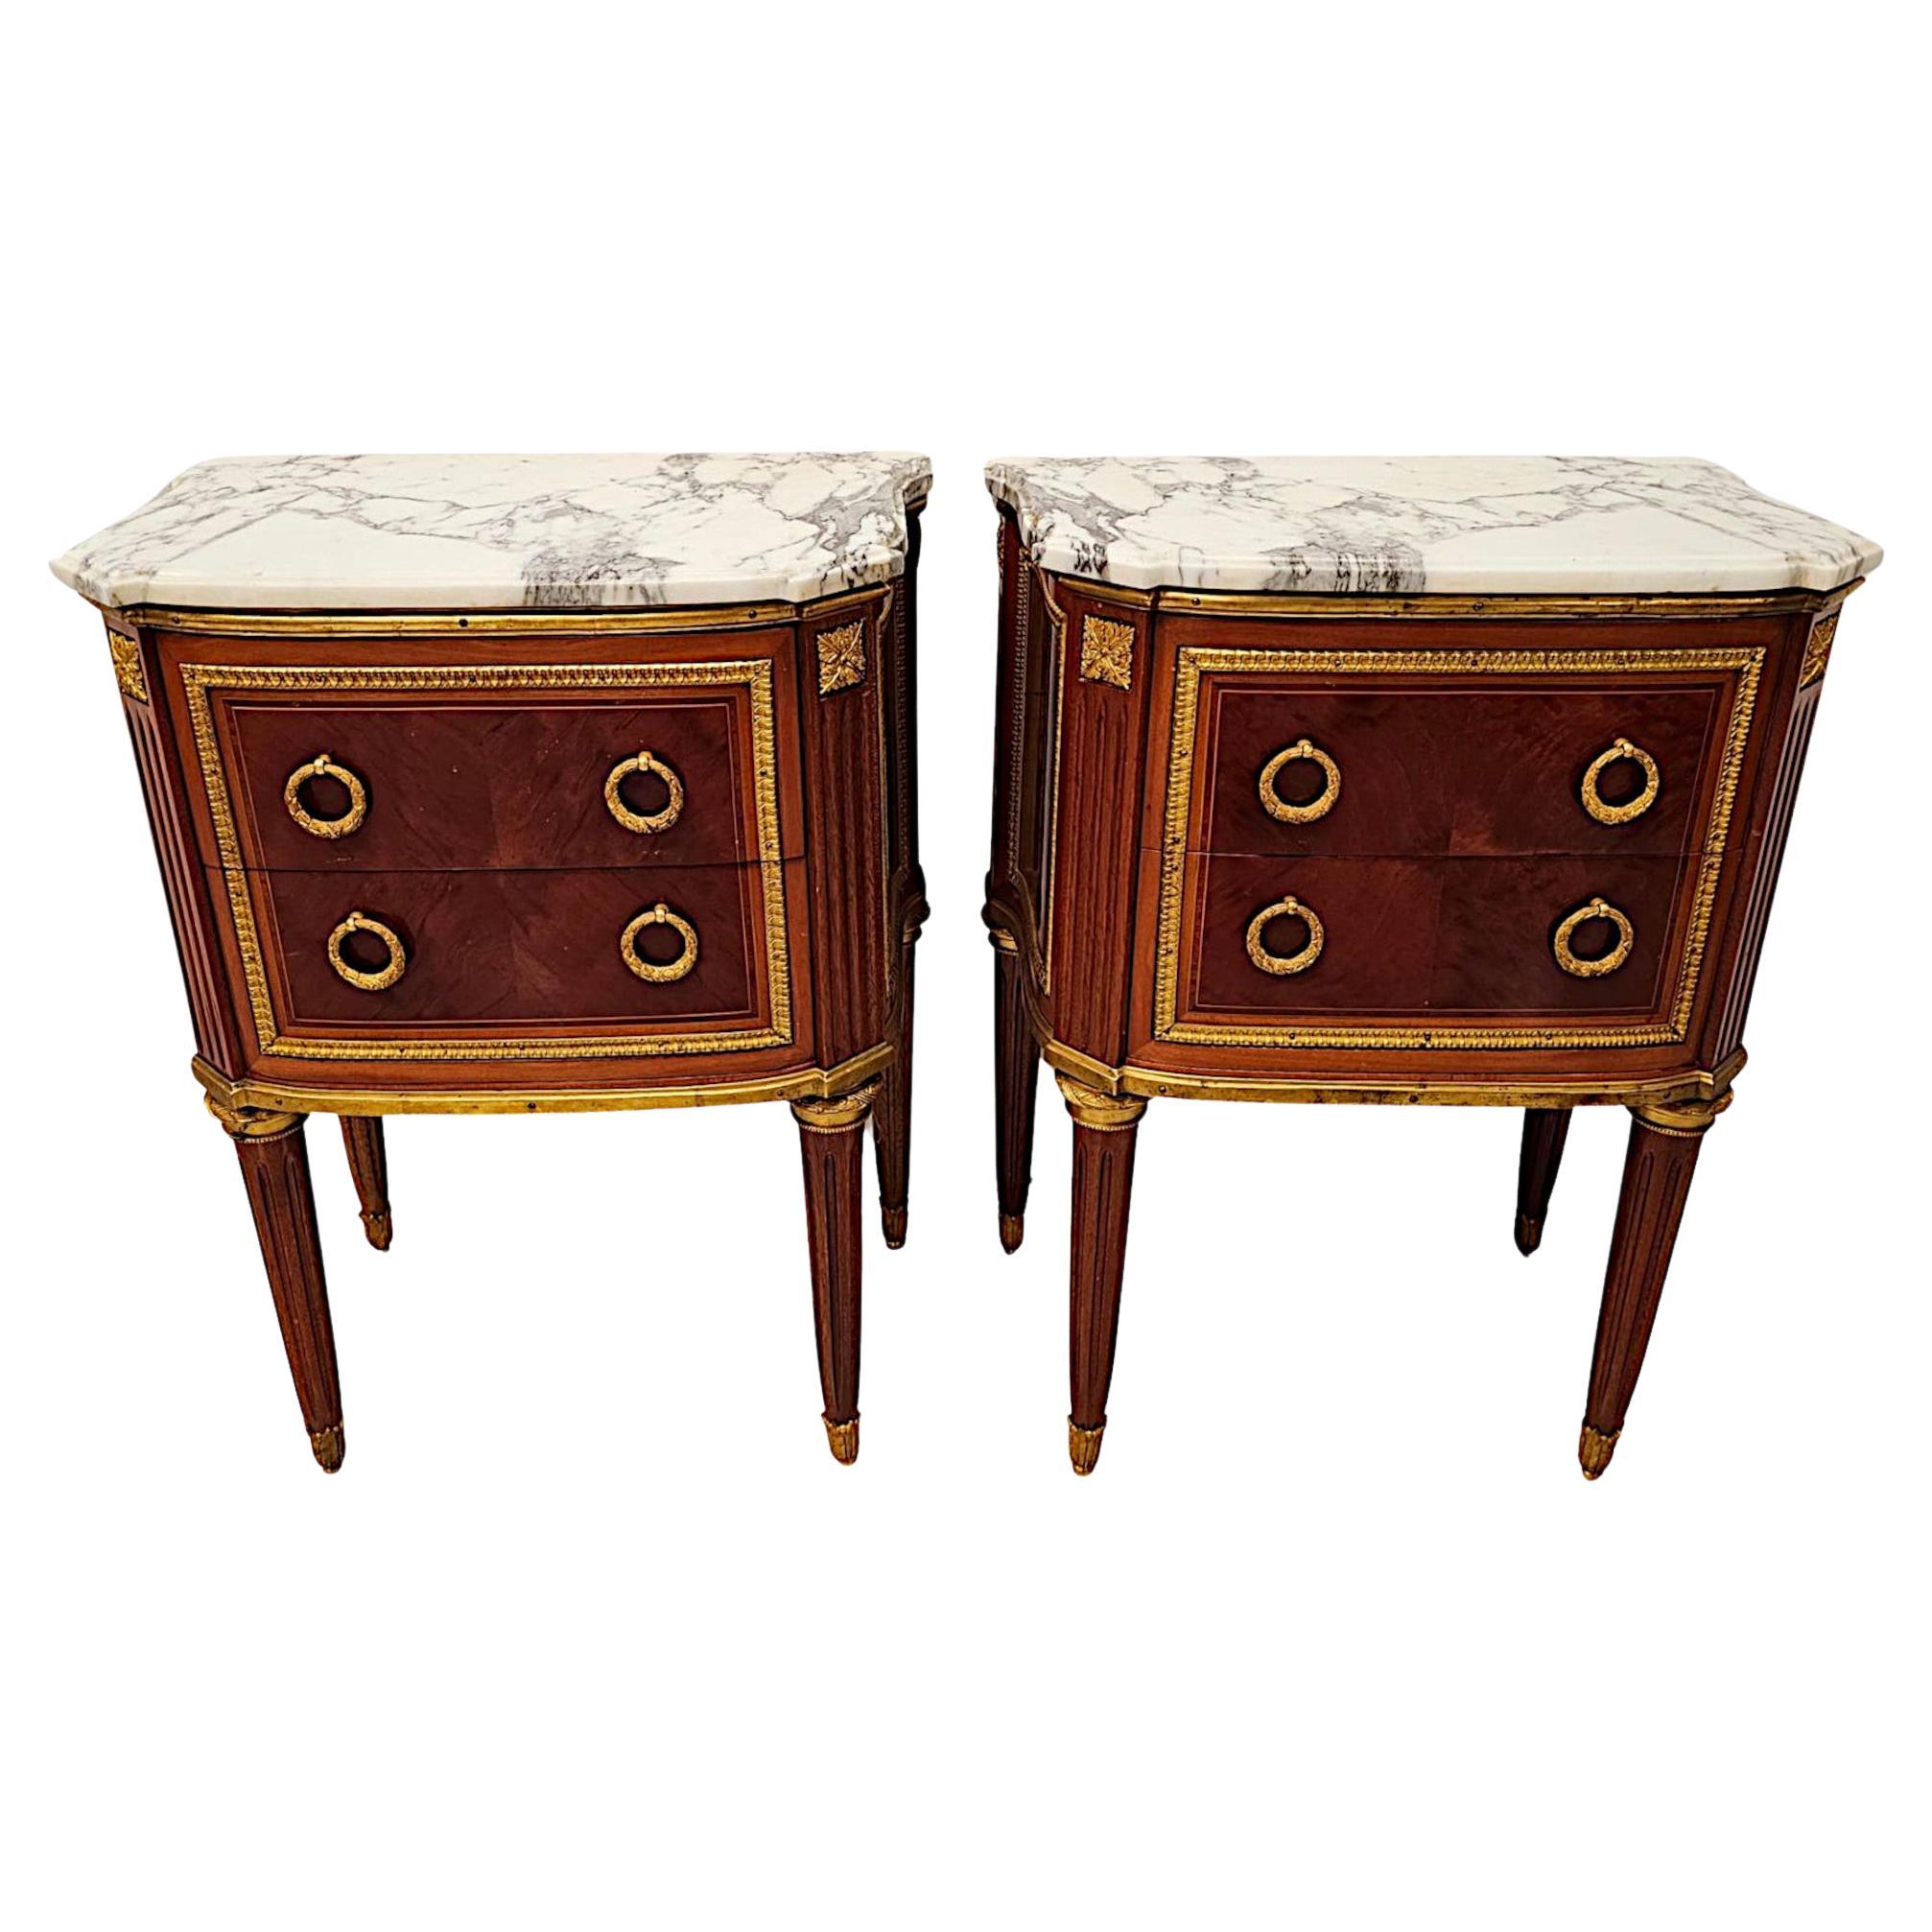 A  Fine 20th Century Pair of Marble Top Side Tables or Chests with Ormolu Mounts For Sale